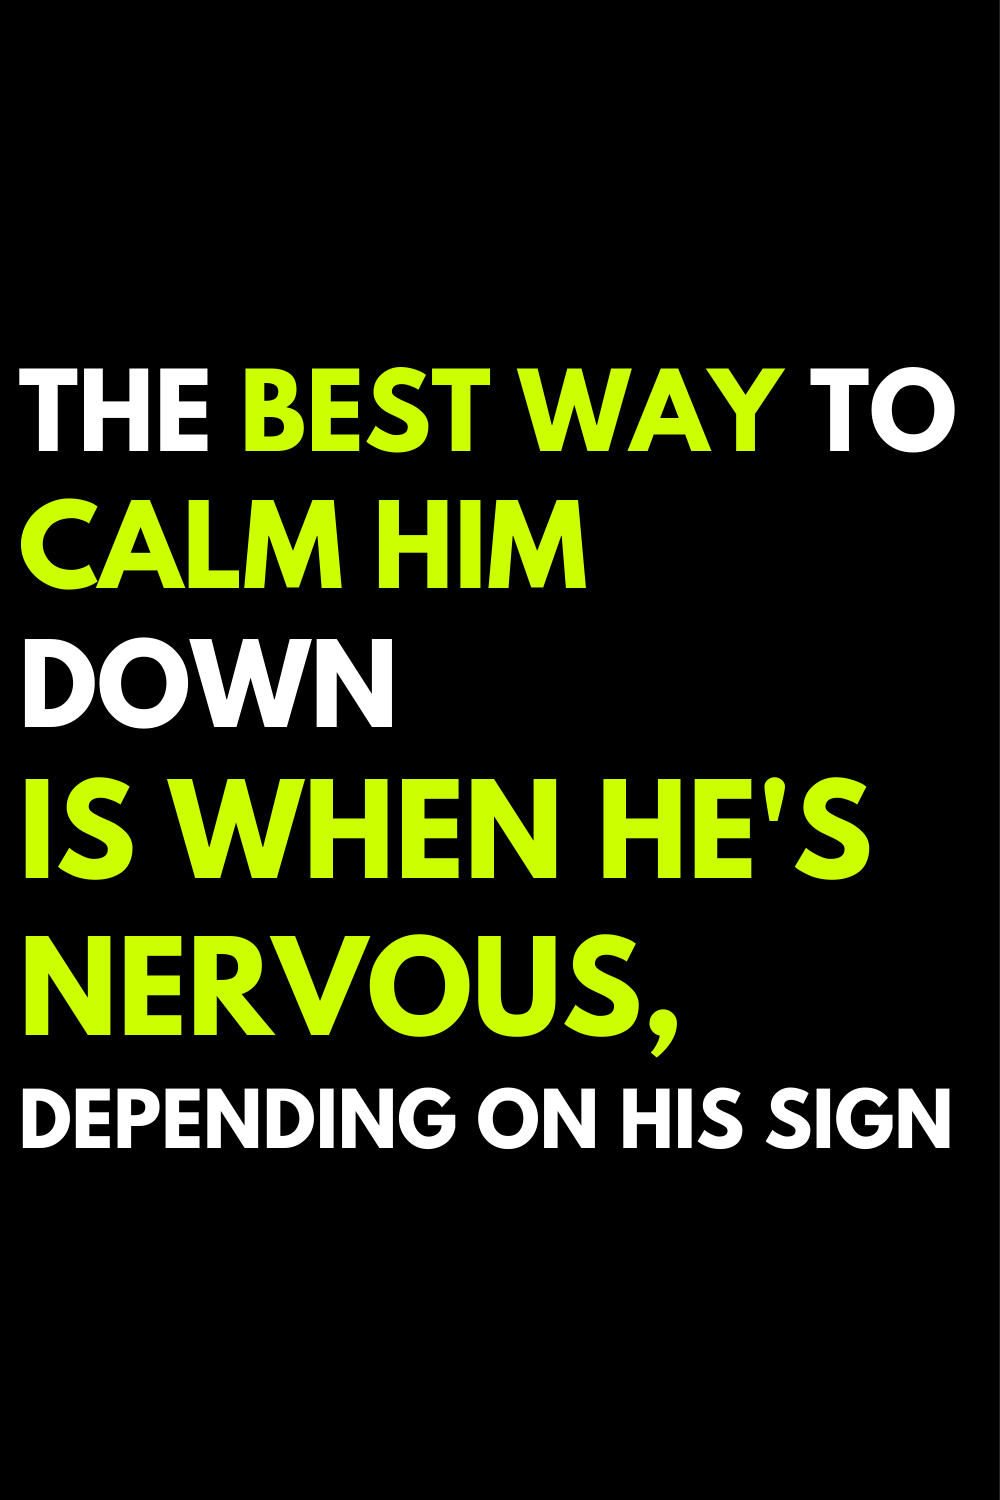 The best way to calm him down is when he's nervous, depending on his sign